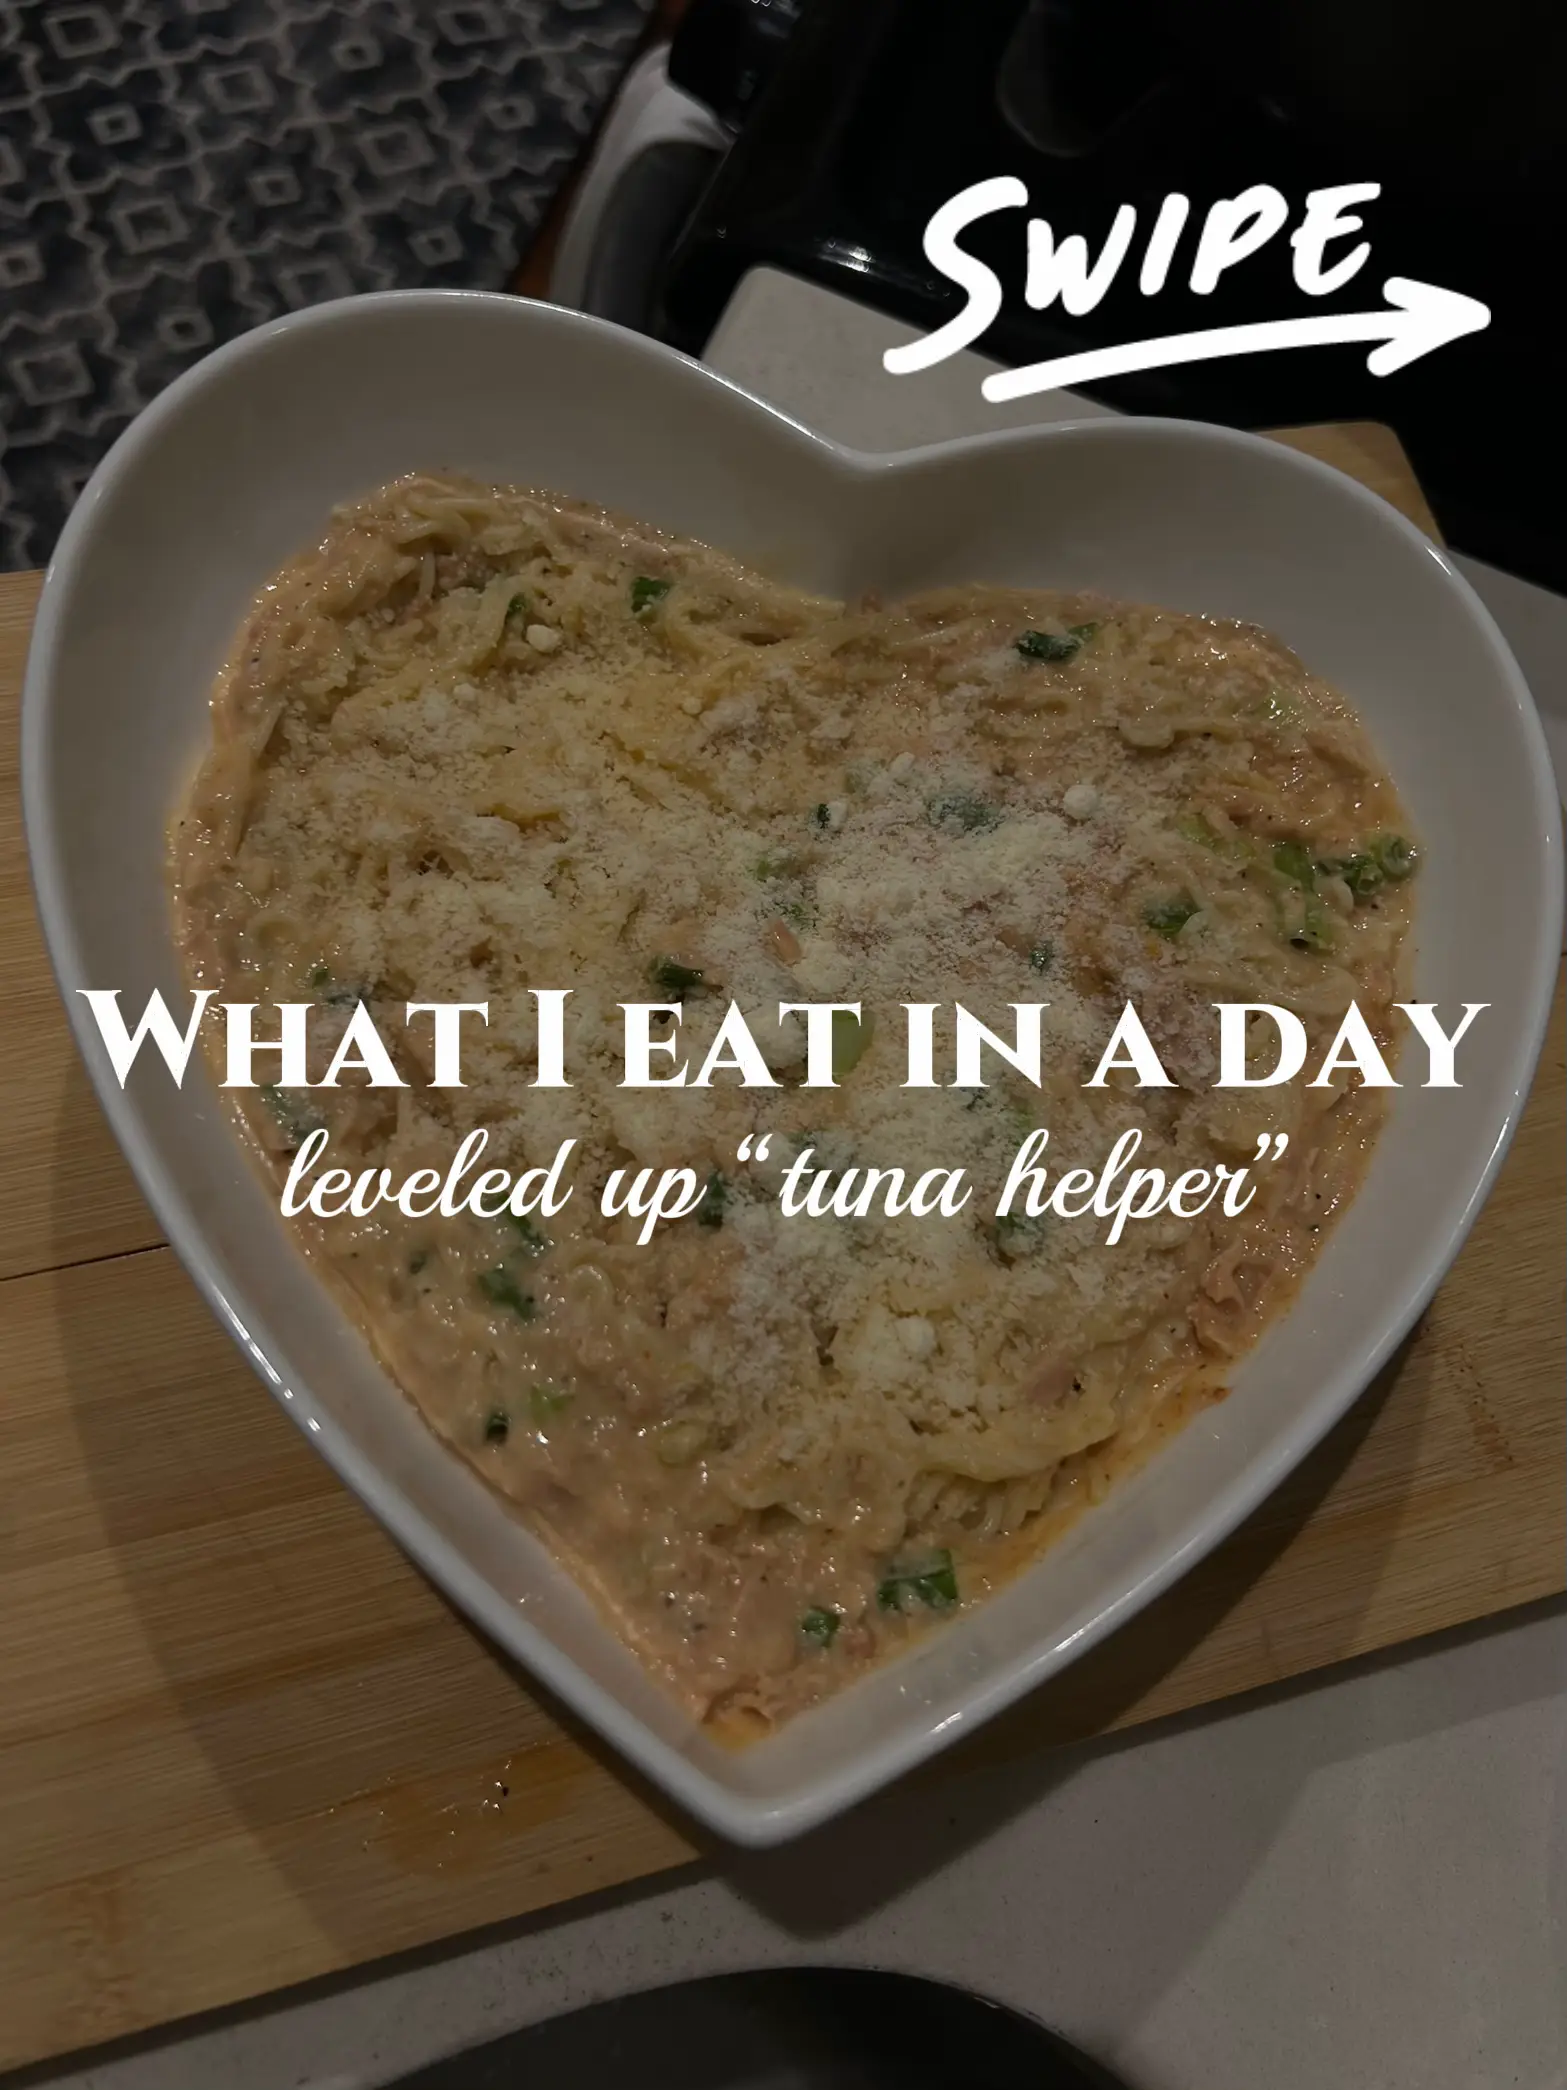 #Whatieatinaday: Leveled Up ‘Tuna Helper’'s images